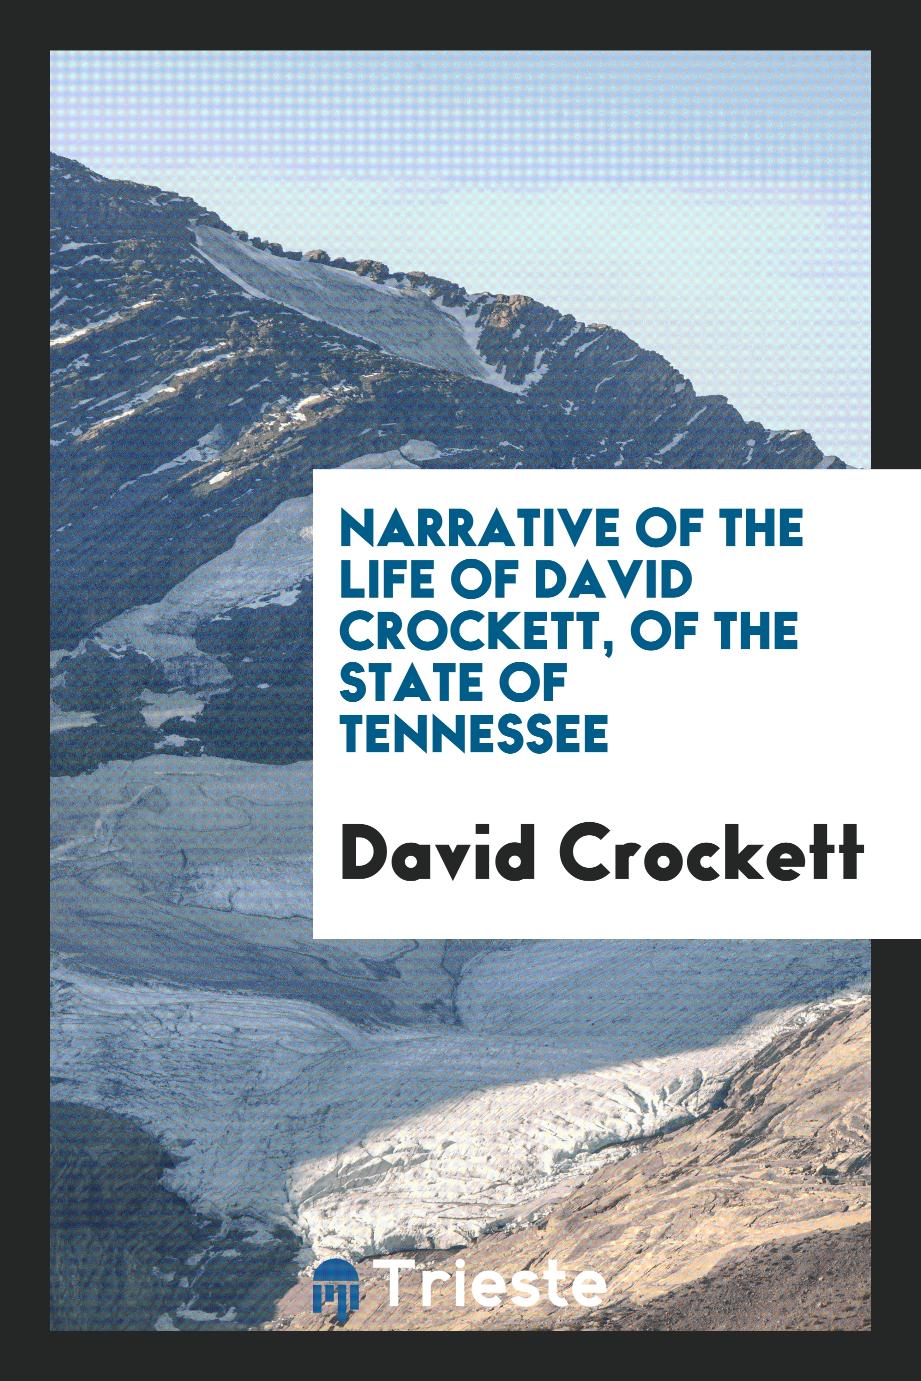 Narrative of the life of David Crockett, of the state of Tennessee